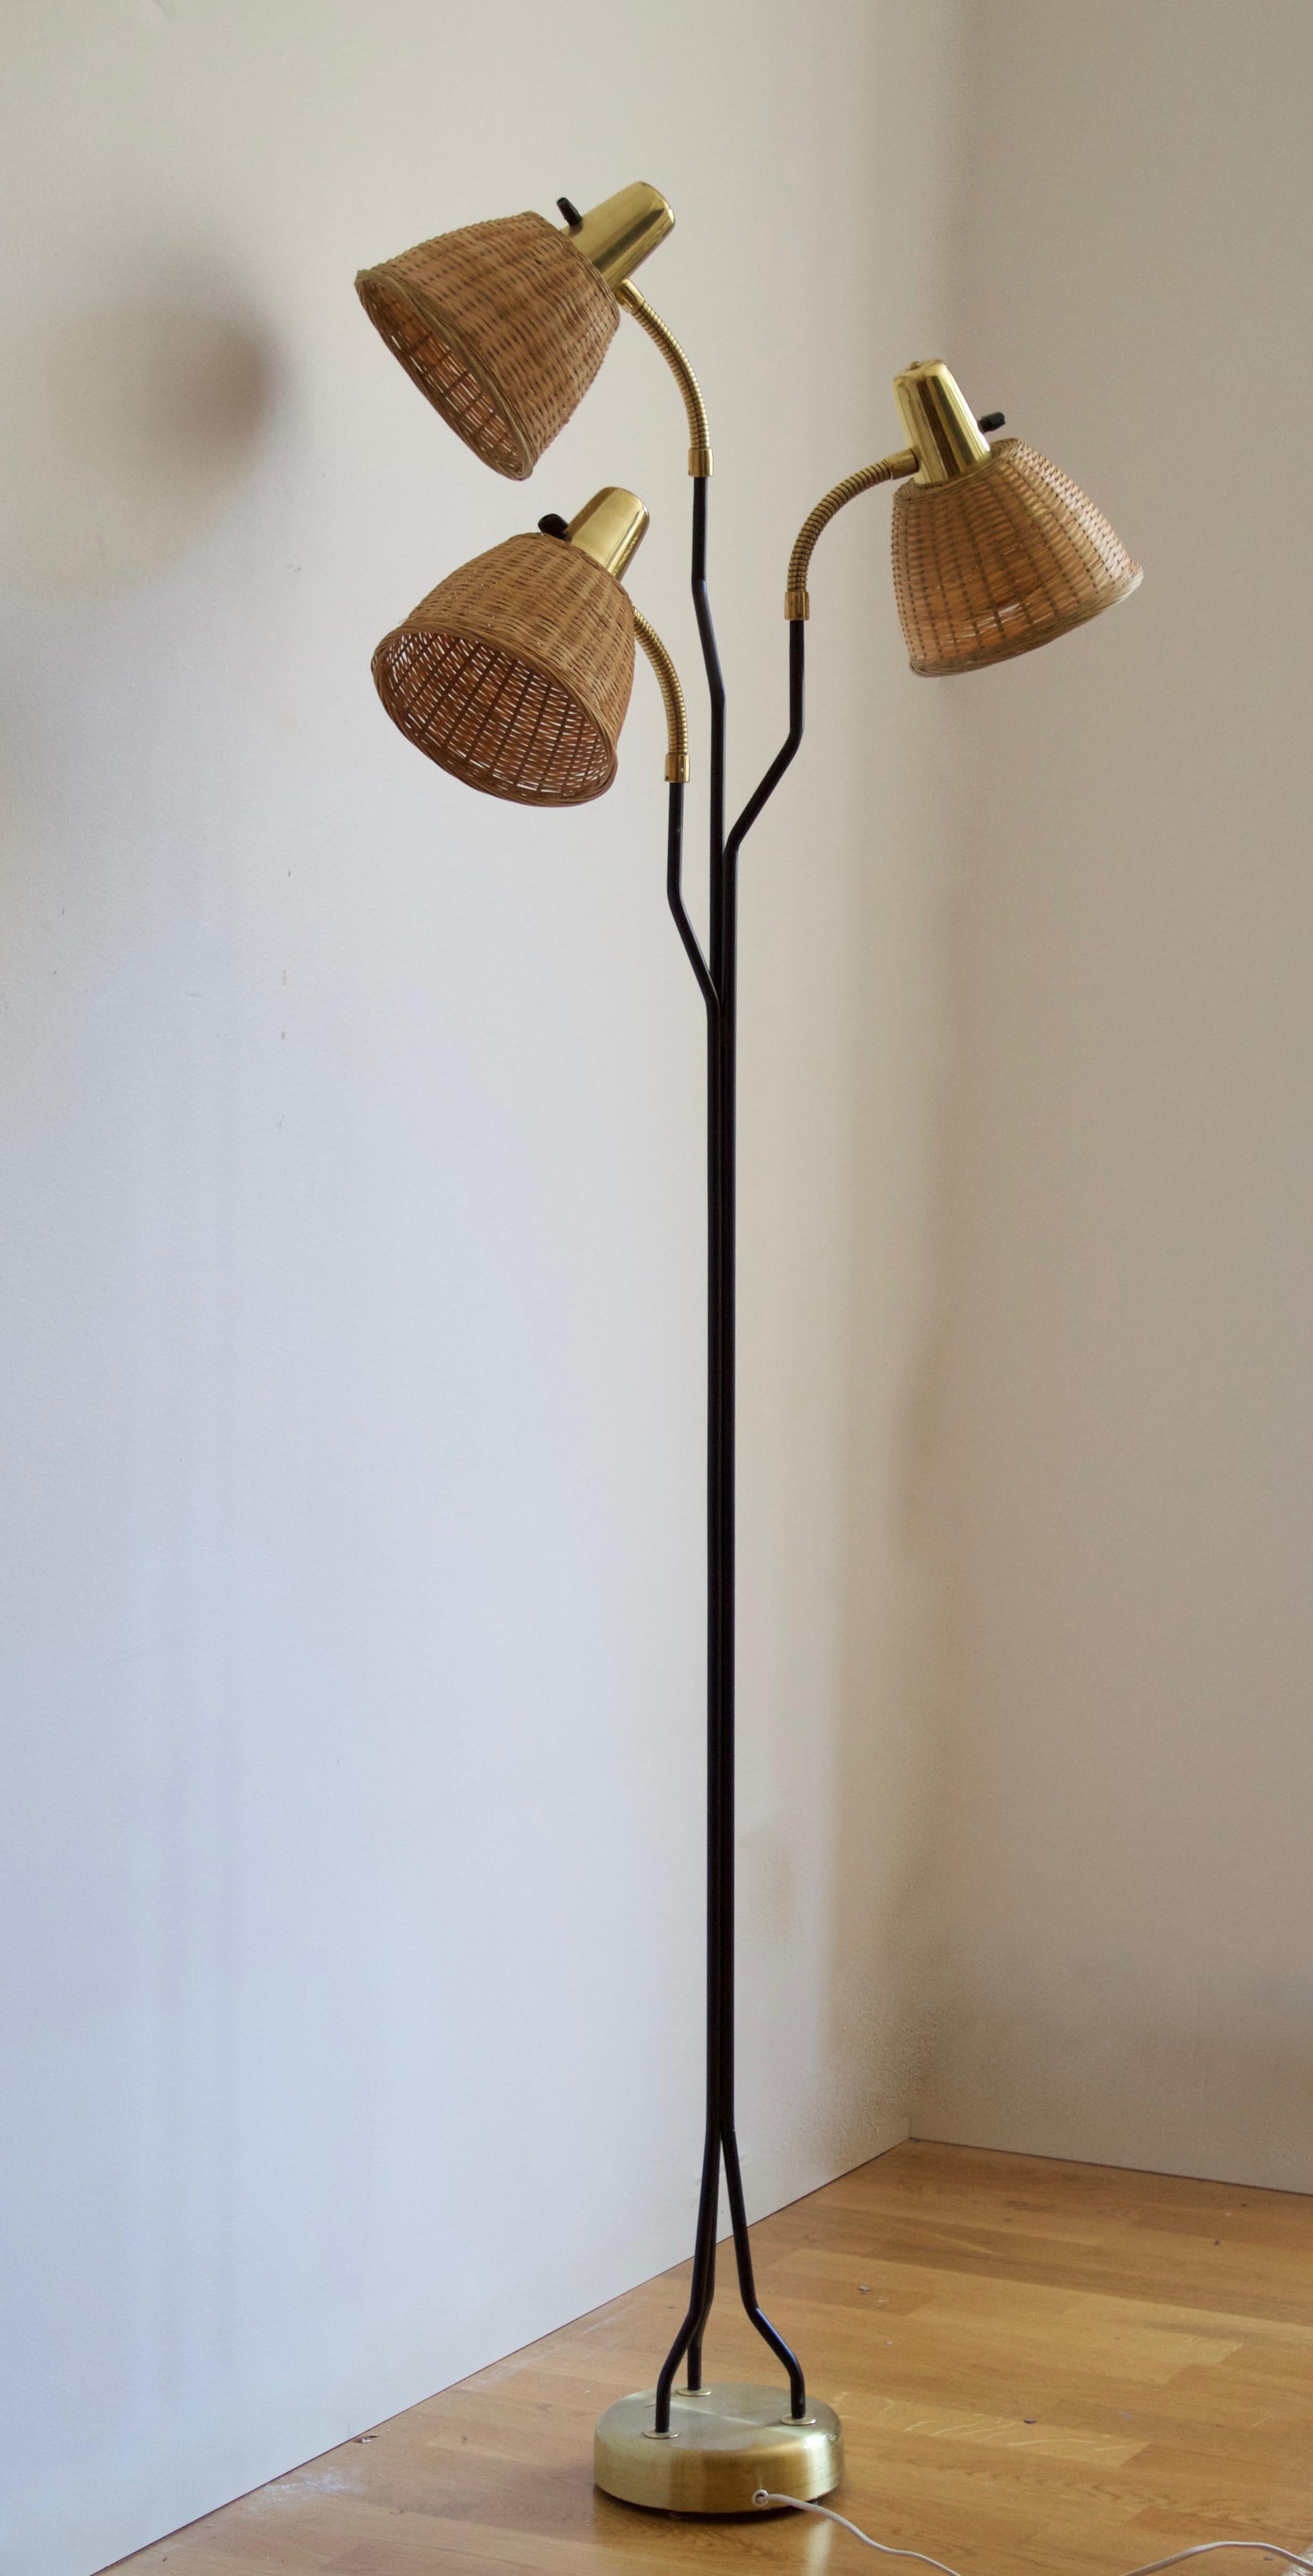 An adjustable three-armed floor lamp. In lacquered metal, brass. Assorted vintage rattan lampshades.